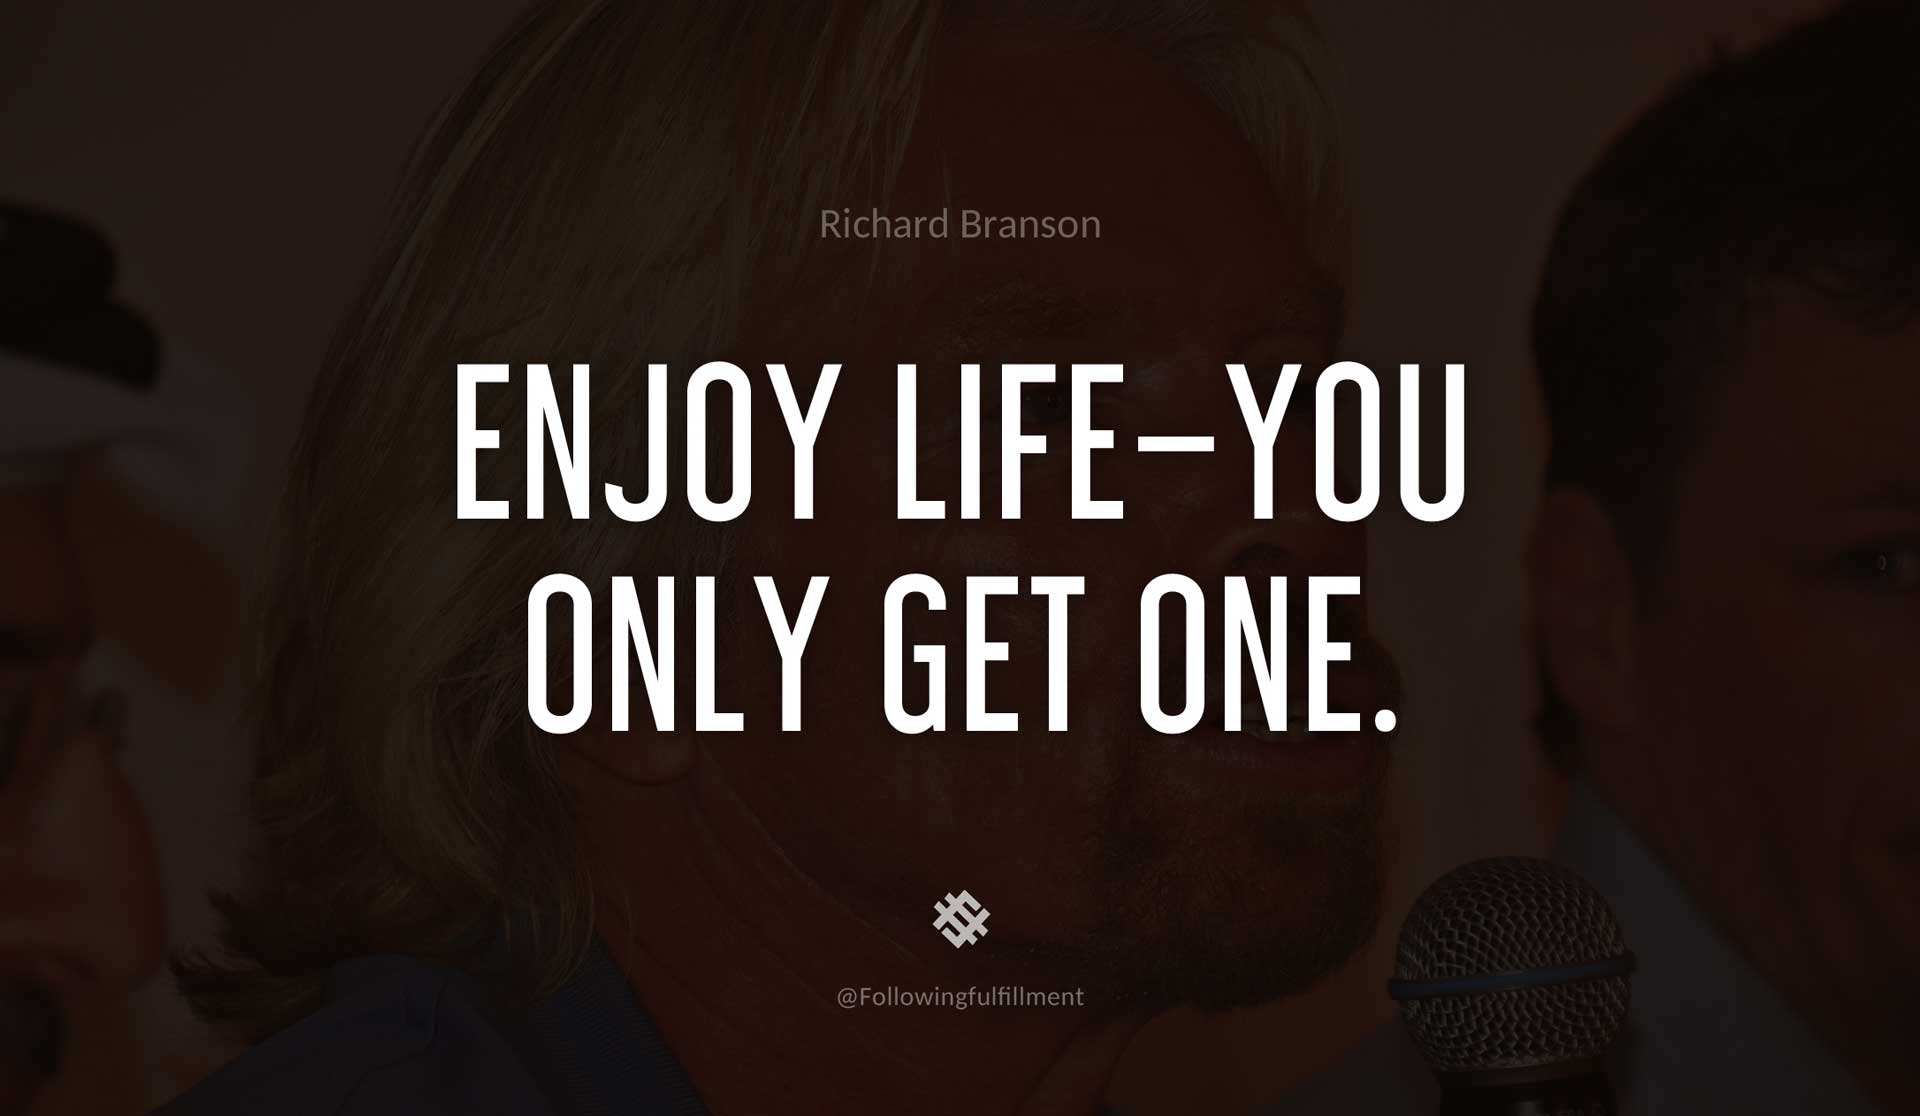 Enjoy-life-you-only-get-one.--RICHARD-BRANSON-Quote.jpg